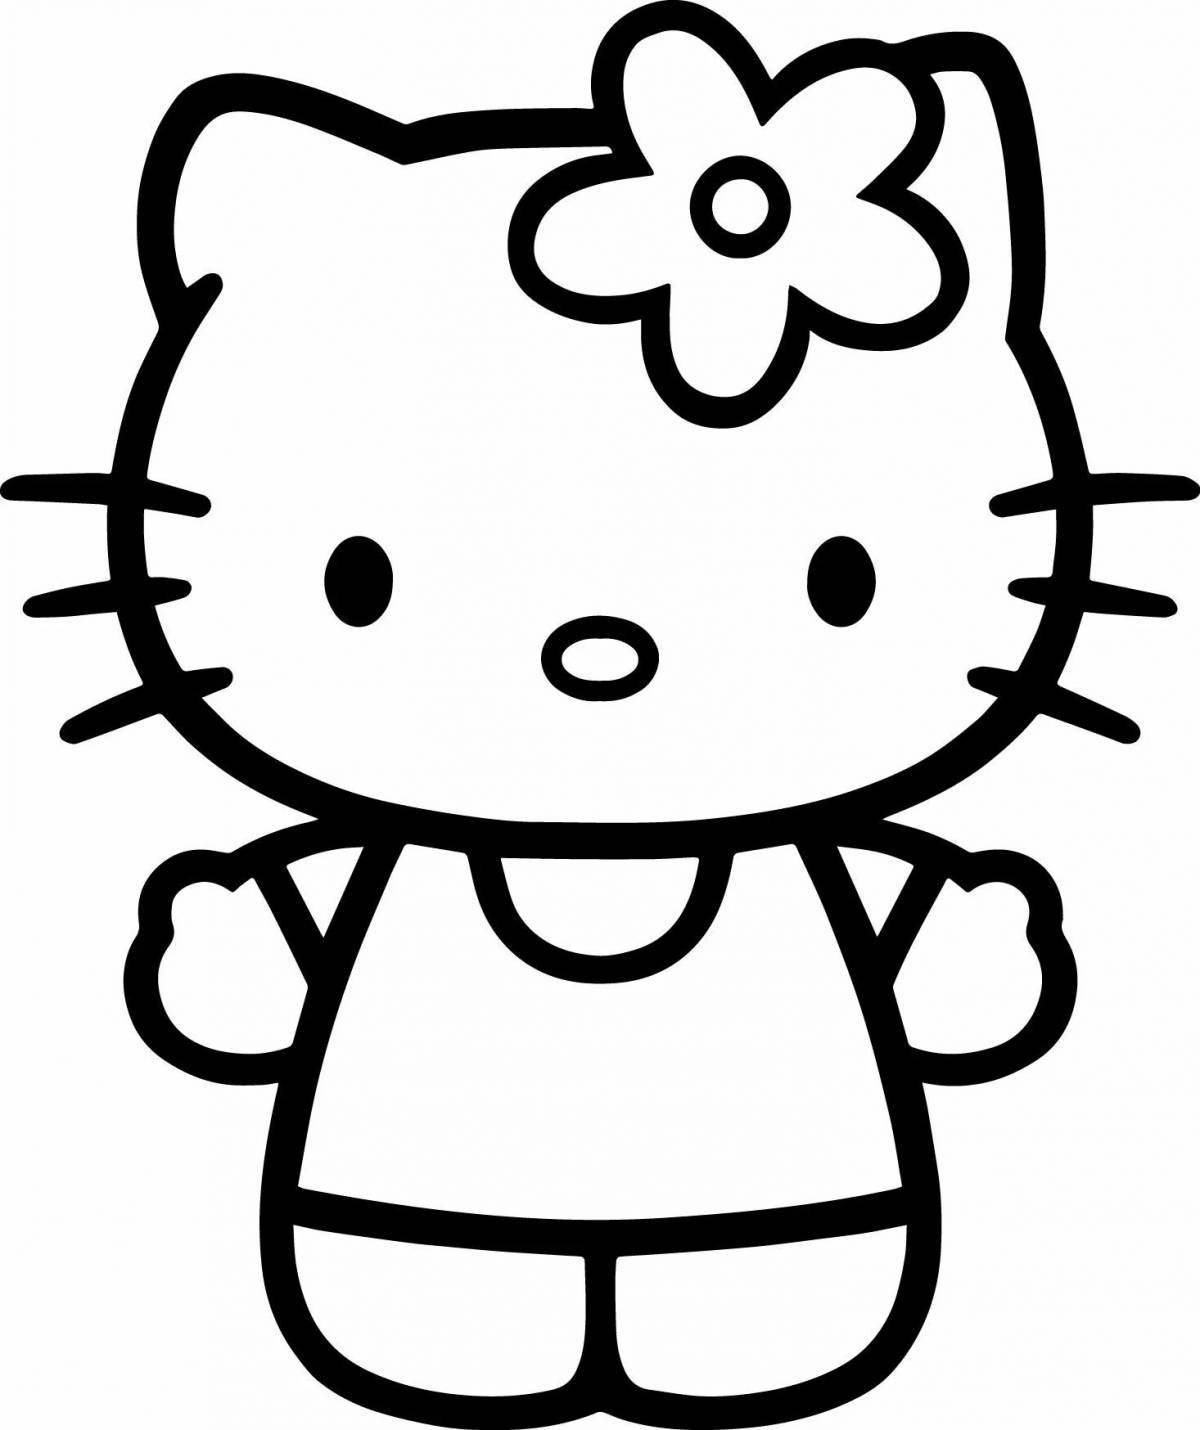 Glowing coloring page hello kitty sticker